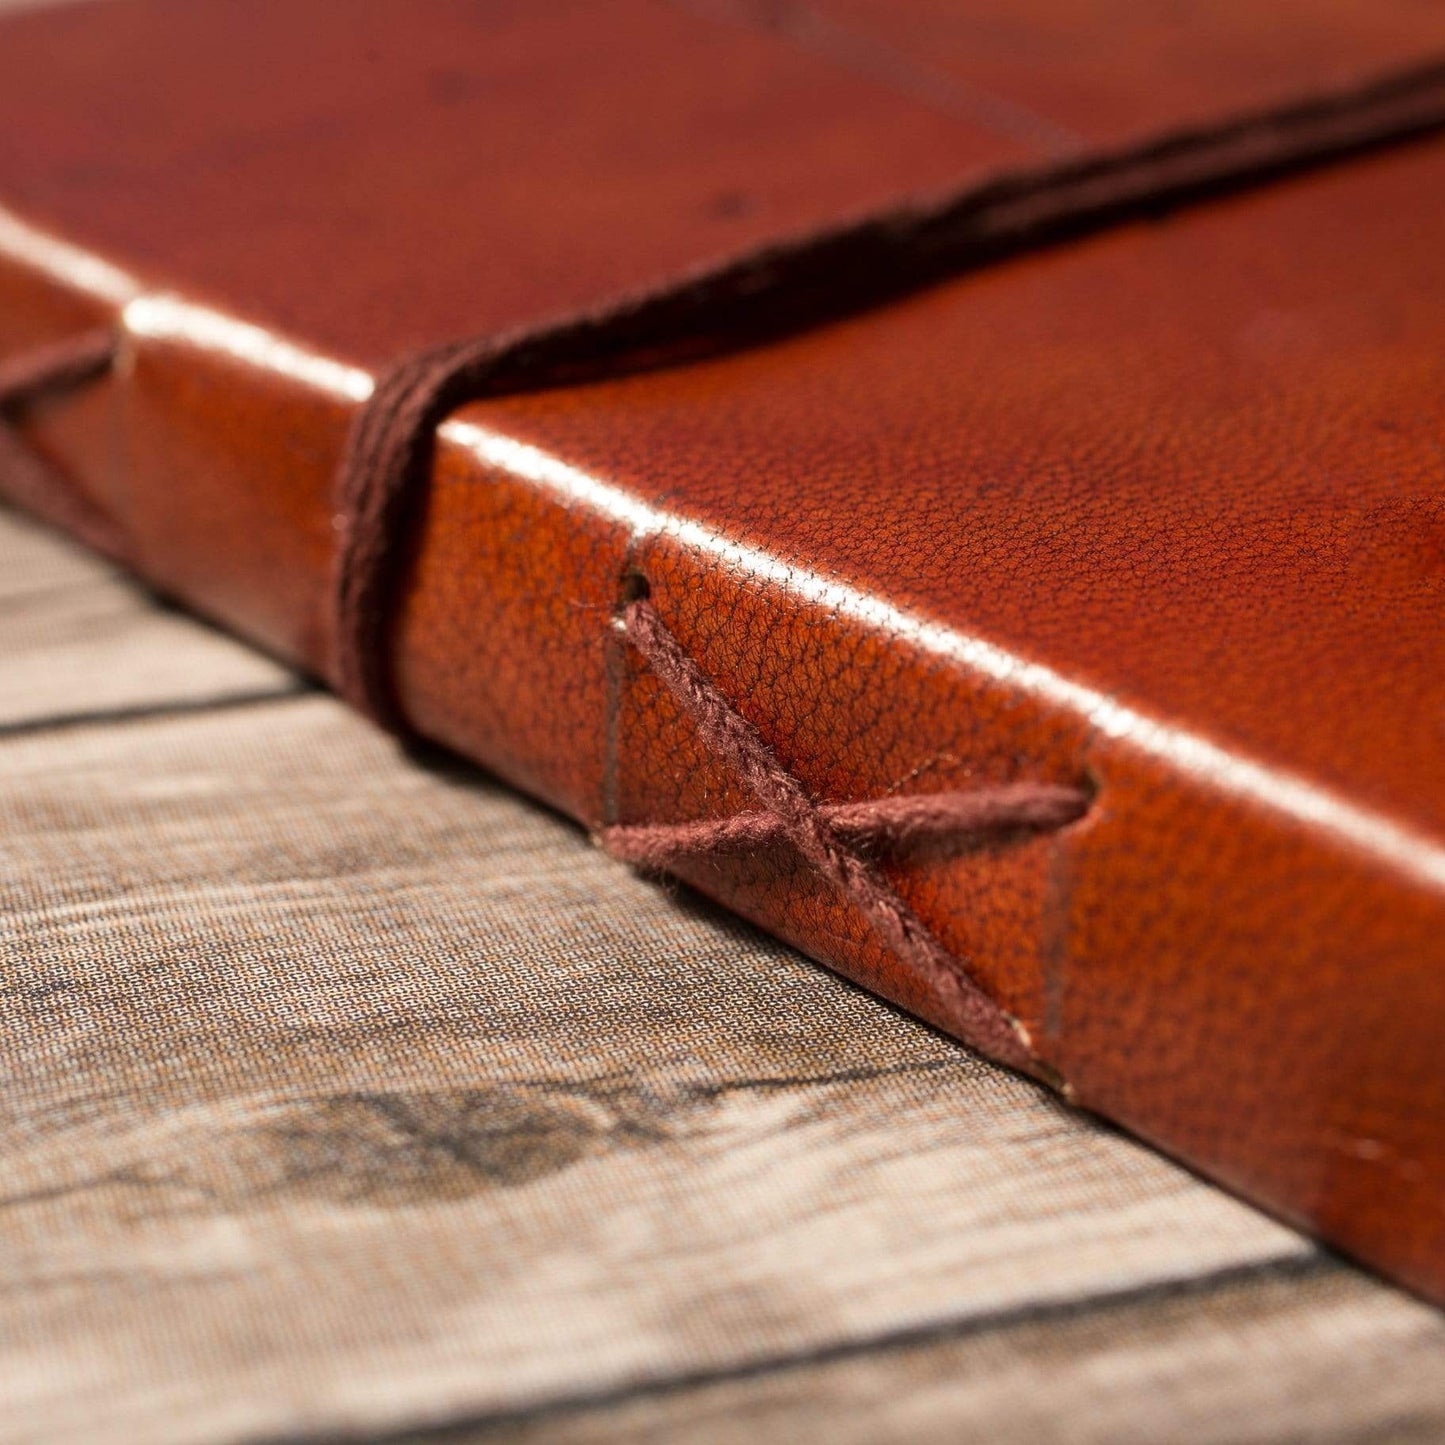 "The Future Belongs" Handmade Leather Journal - Leather Journals By Soothi